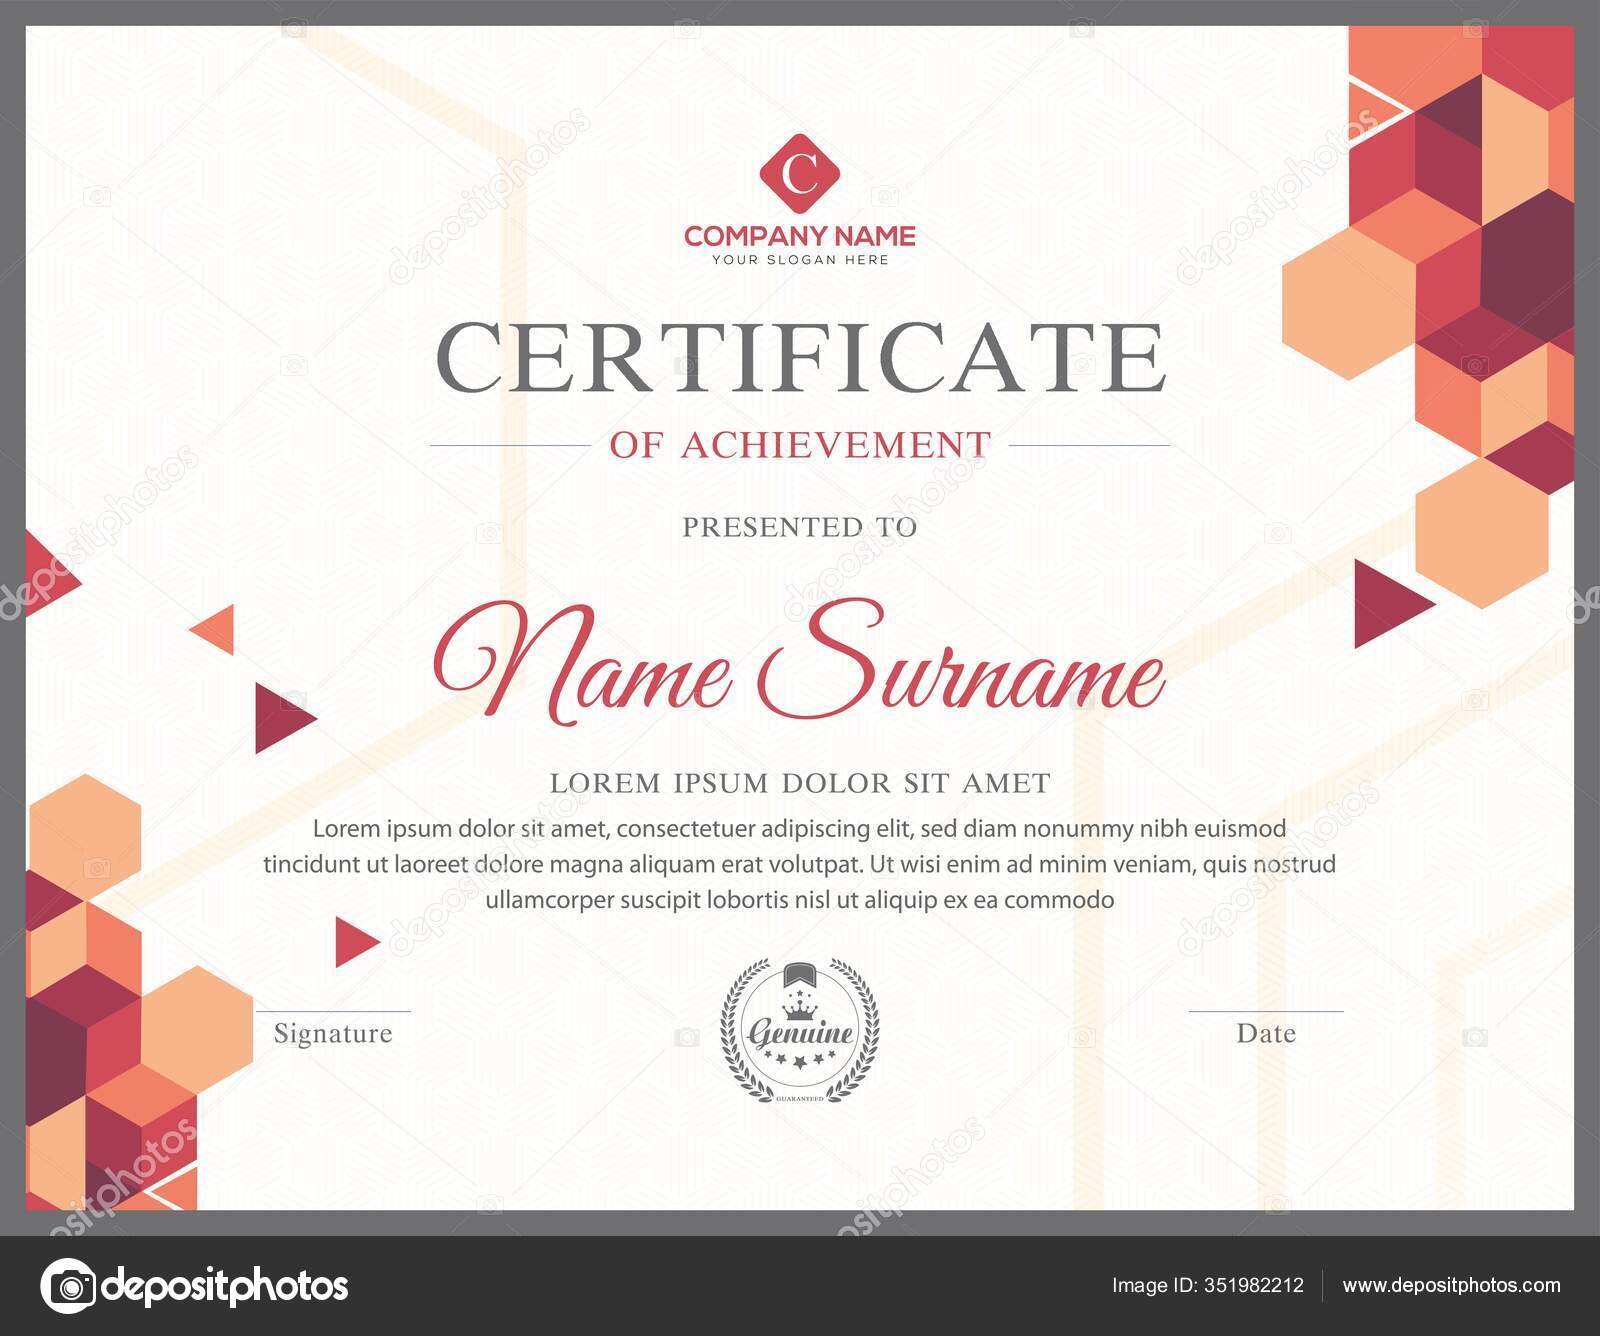 Creative Multipurpose Certificate Template Design All Types Within Referral Certificate Template